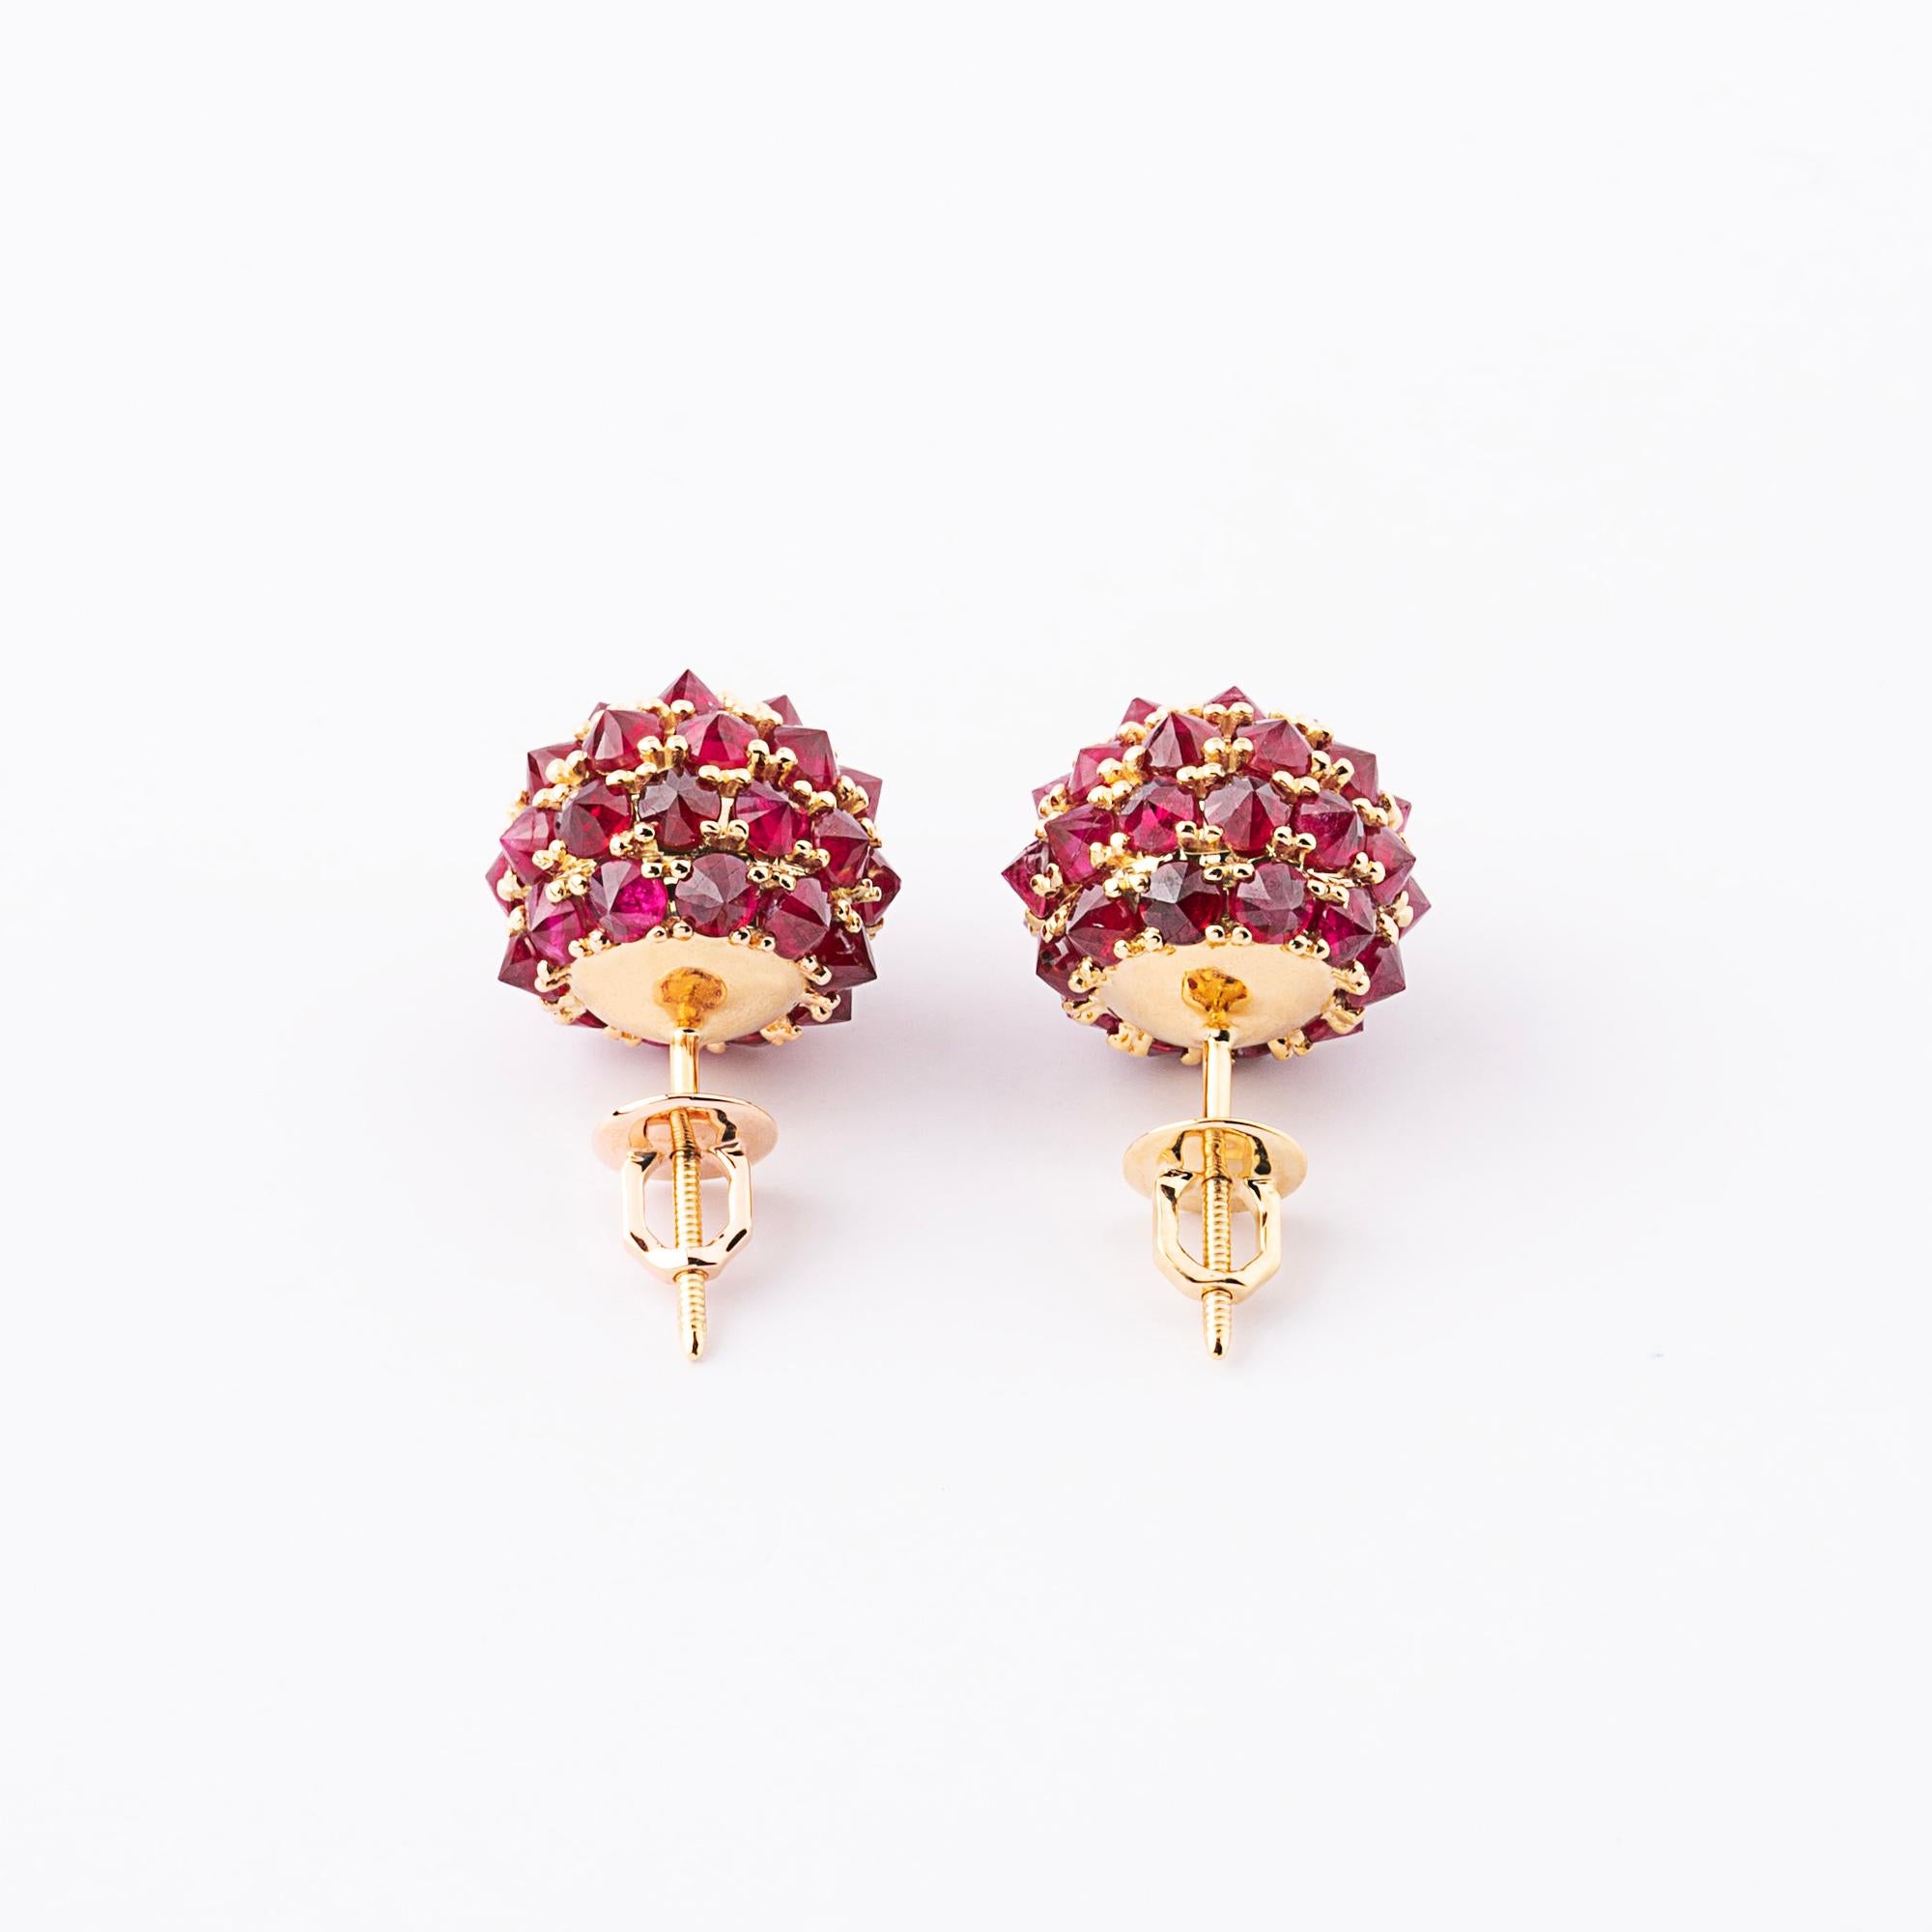 Blood red ruby earrings in 18k gold. Over 8 ct. natural specially cut 2.7mm wide brilliant rubies cover the face of 18k gold balls. The earrings have screw backs. Total gold weight 9 grams. 
Each spike ball is 1.4 cm wide (14mm diameter). 

The